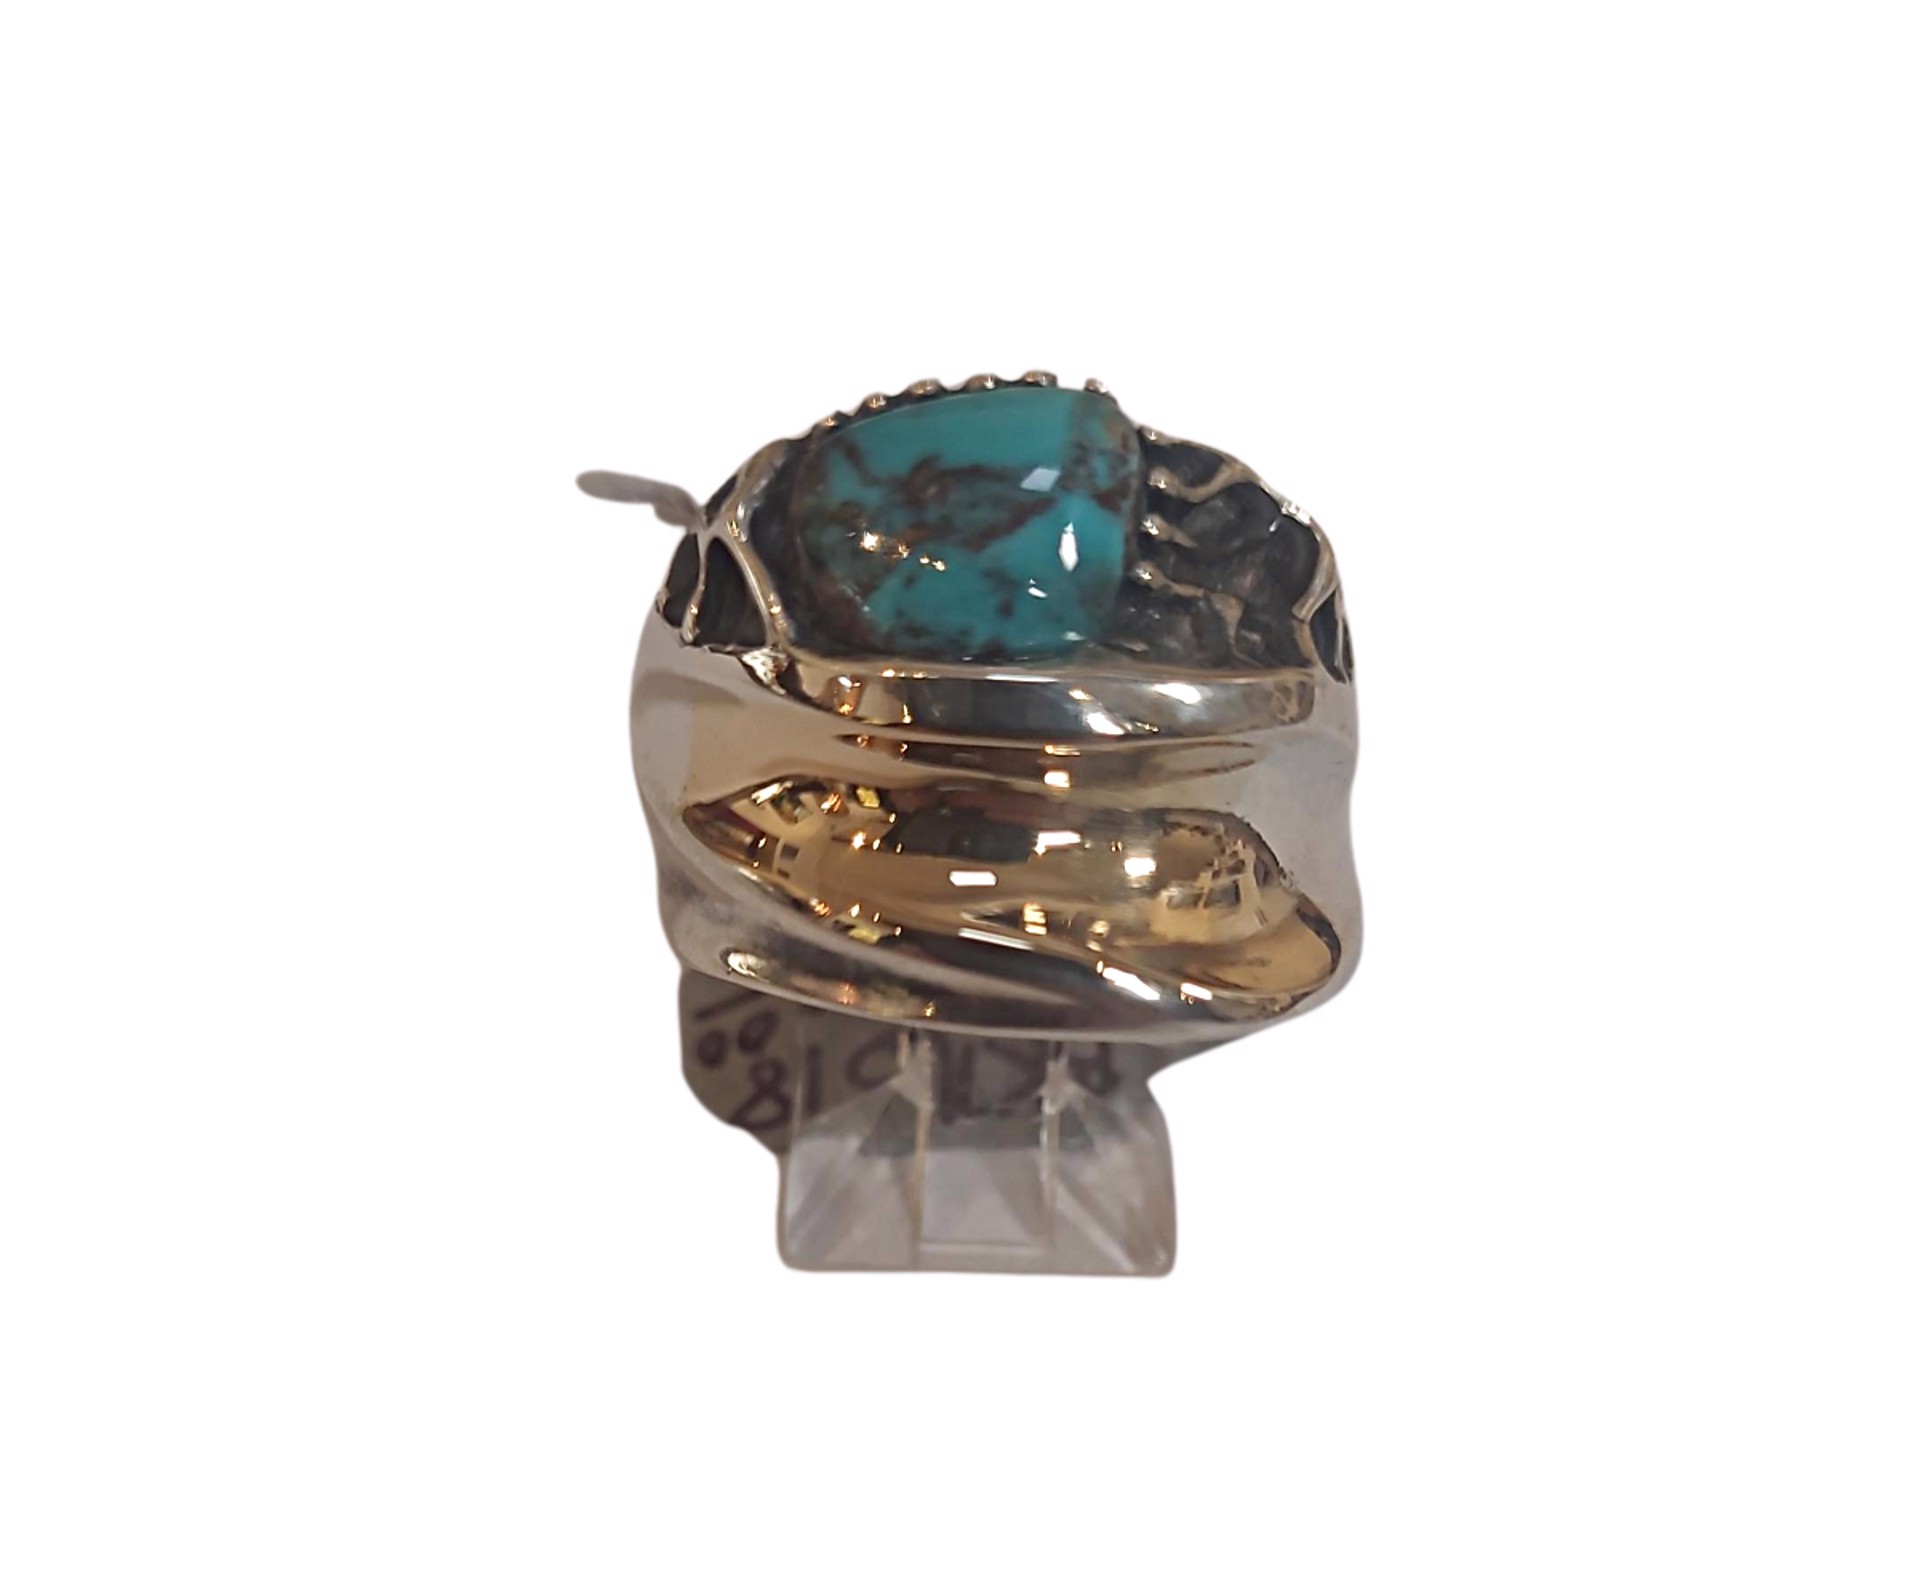 Ring - Sterling Silver and 18K Gold with Bisbee Turquoise BKN-518 by Ken and Barbara Newman